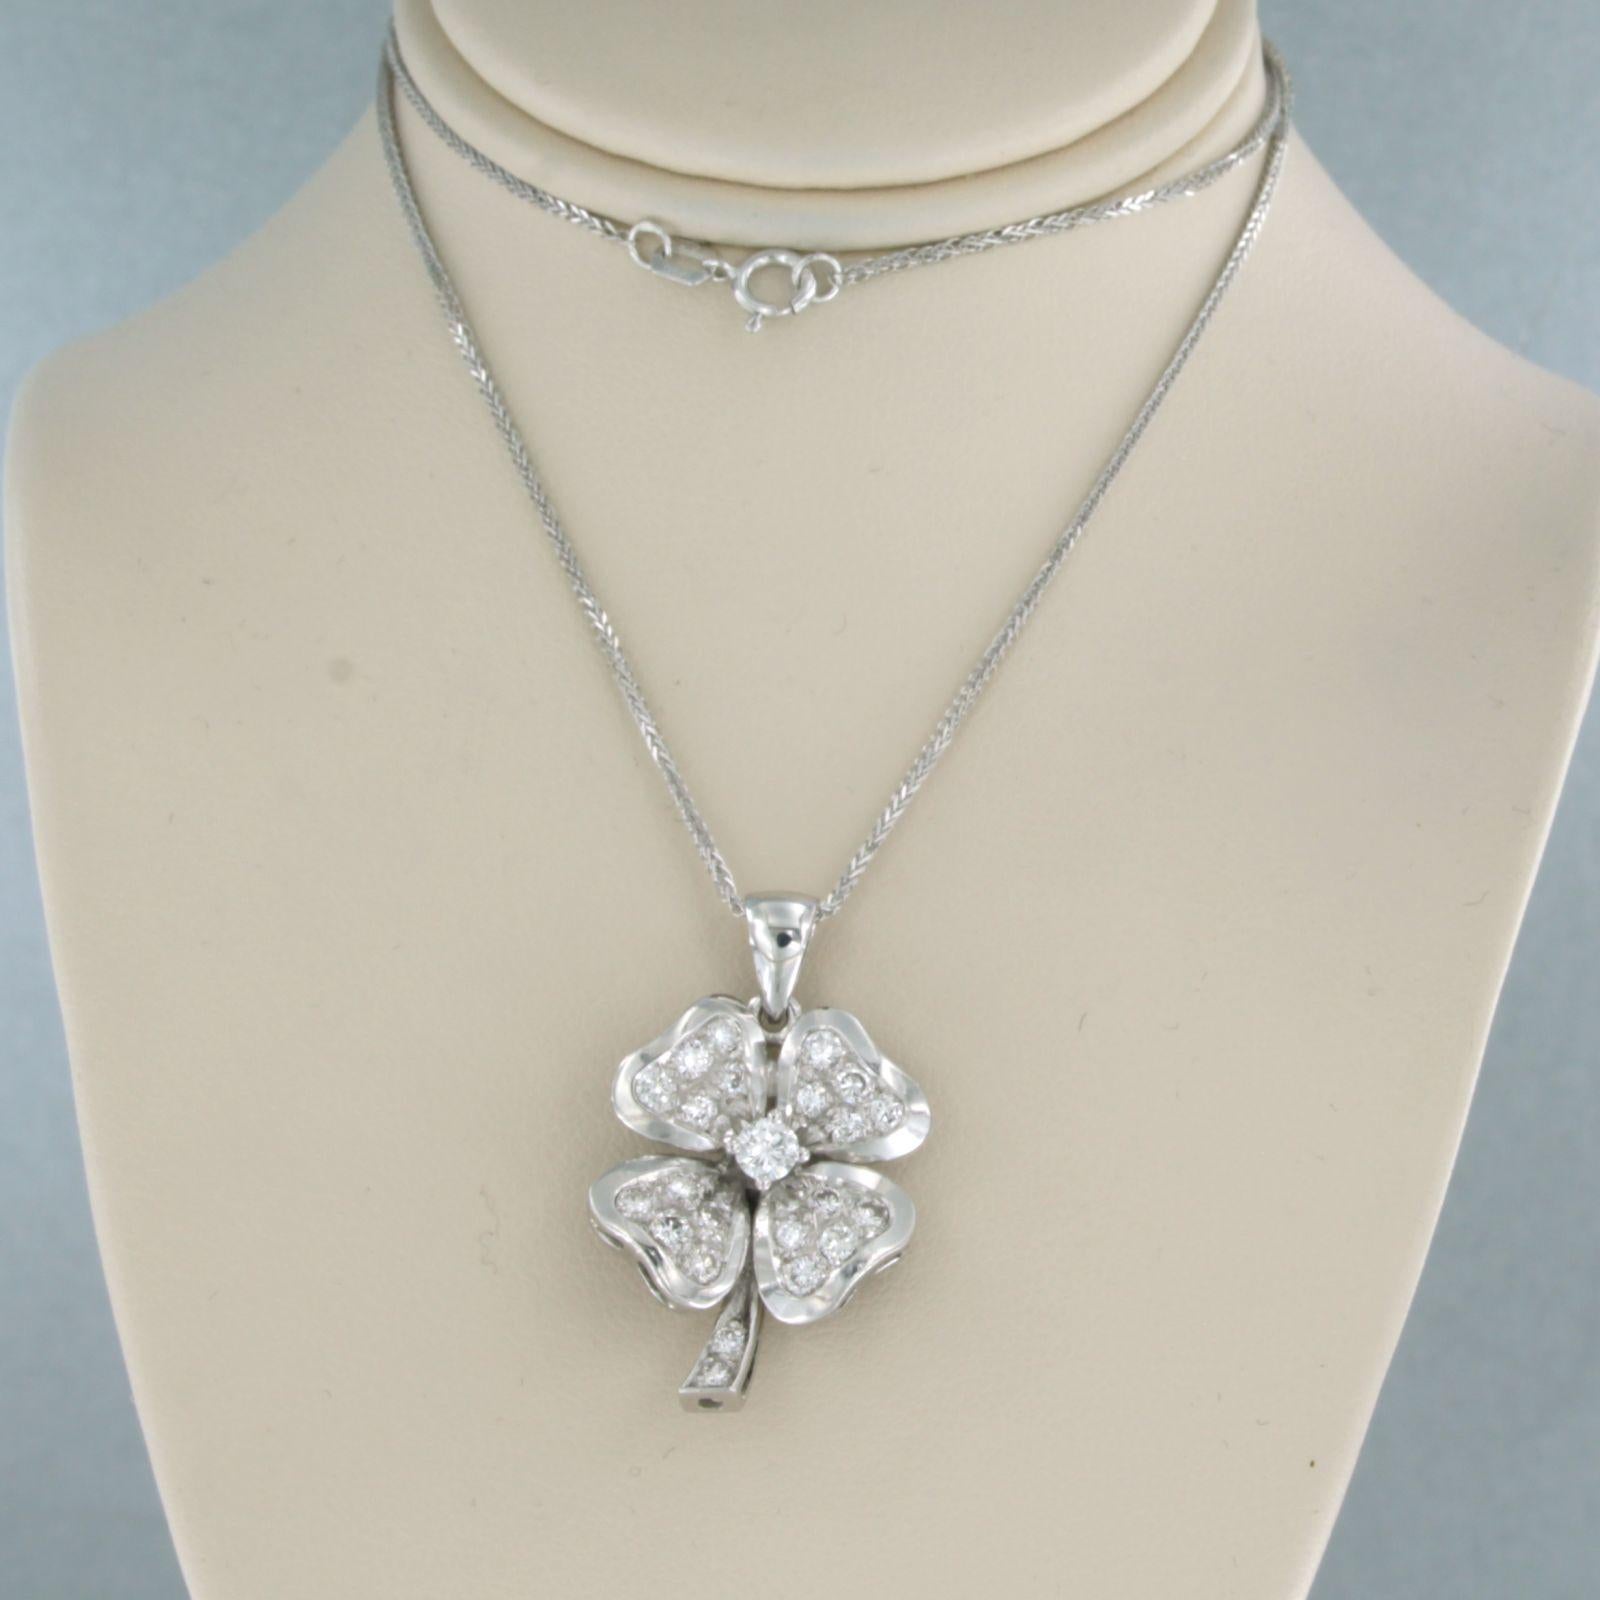 14k white gold necklace with an 18k white gold pendant set with brilliant cut diamonds up to. 0.75ct - F/G - VS/SI - 40 cm long

detailed description

the necklace is 40 cm long and 0.7 mm wide

size of the pendant is approximately 2.9 cm by 1.8